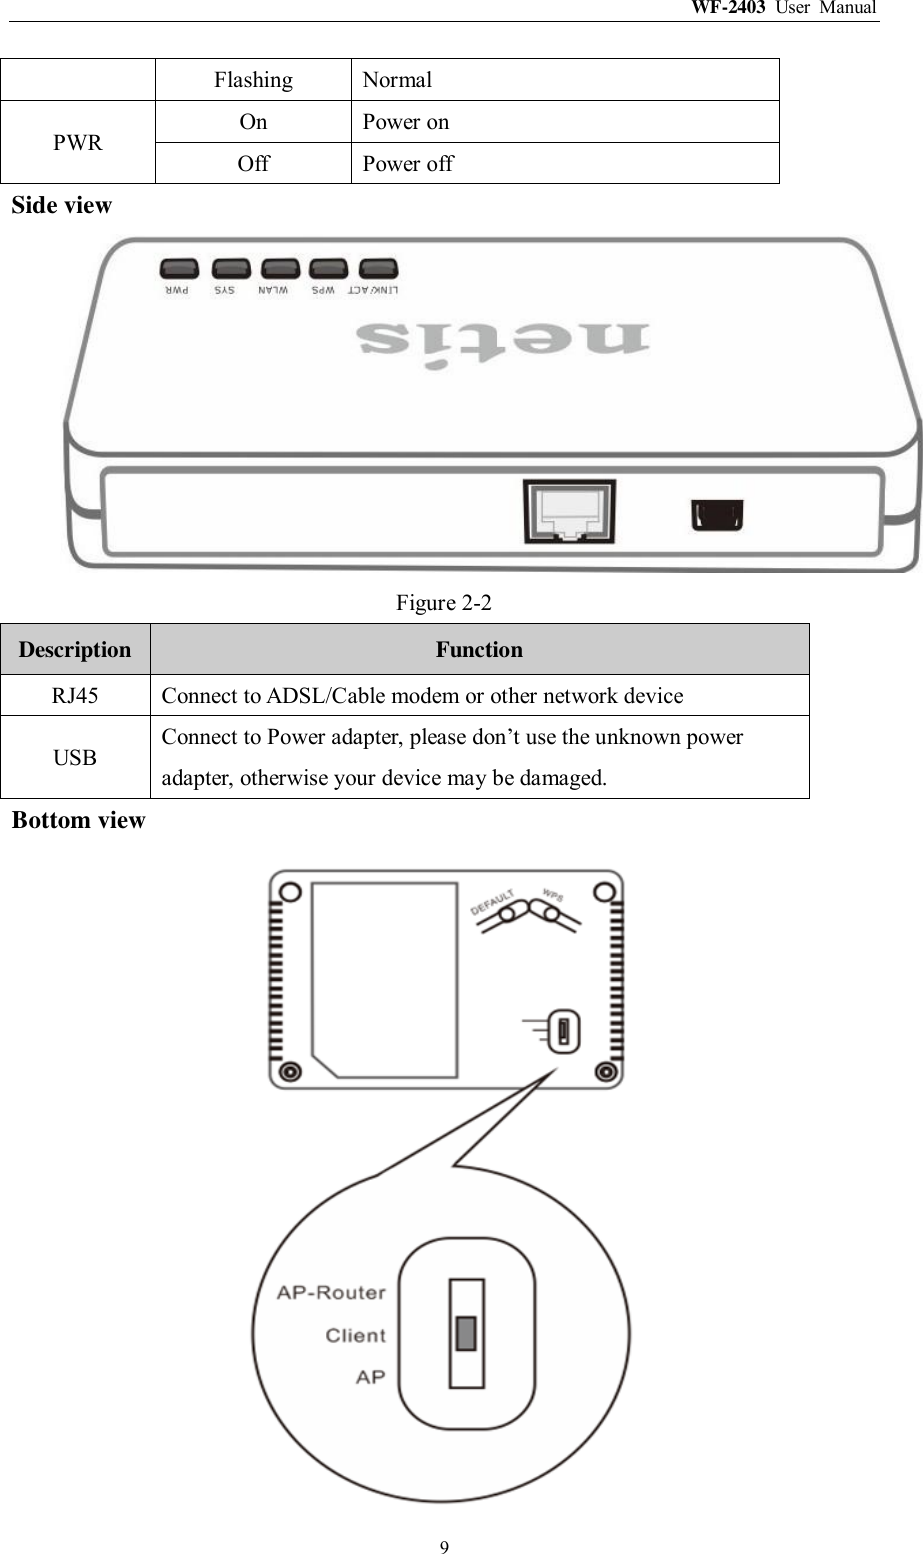 WF-2403  User  Manual  9 Flashing Normal PWR On Power on Off Power off Side view  Figure 2-2 Description Function RJ45 Connect to ADSL/Cable modem or other network device USB Connect to Power adapter, please don‟t use the unknown power adapter, otherwise your device may be damaged. Bottom view  